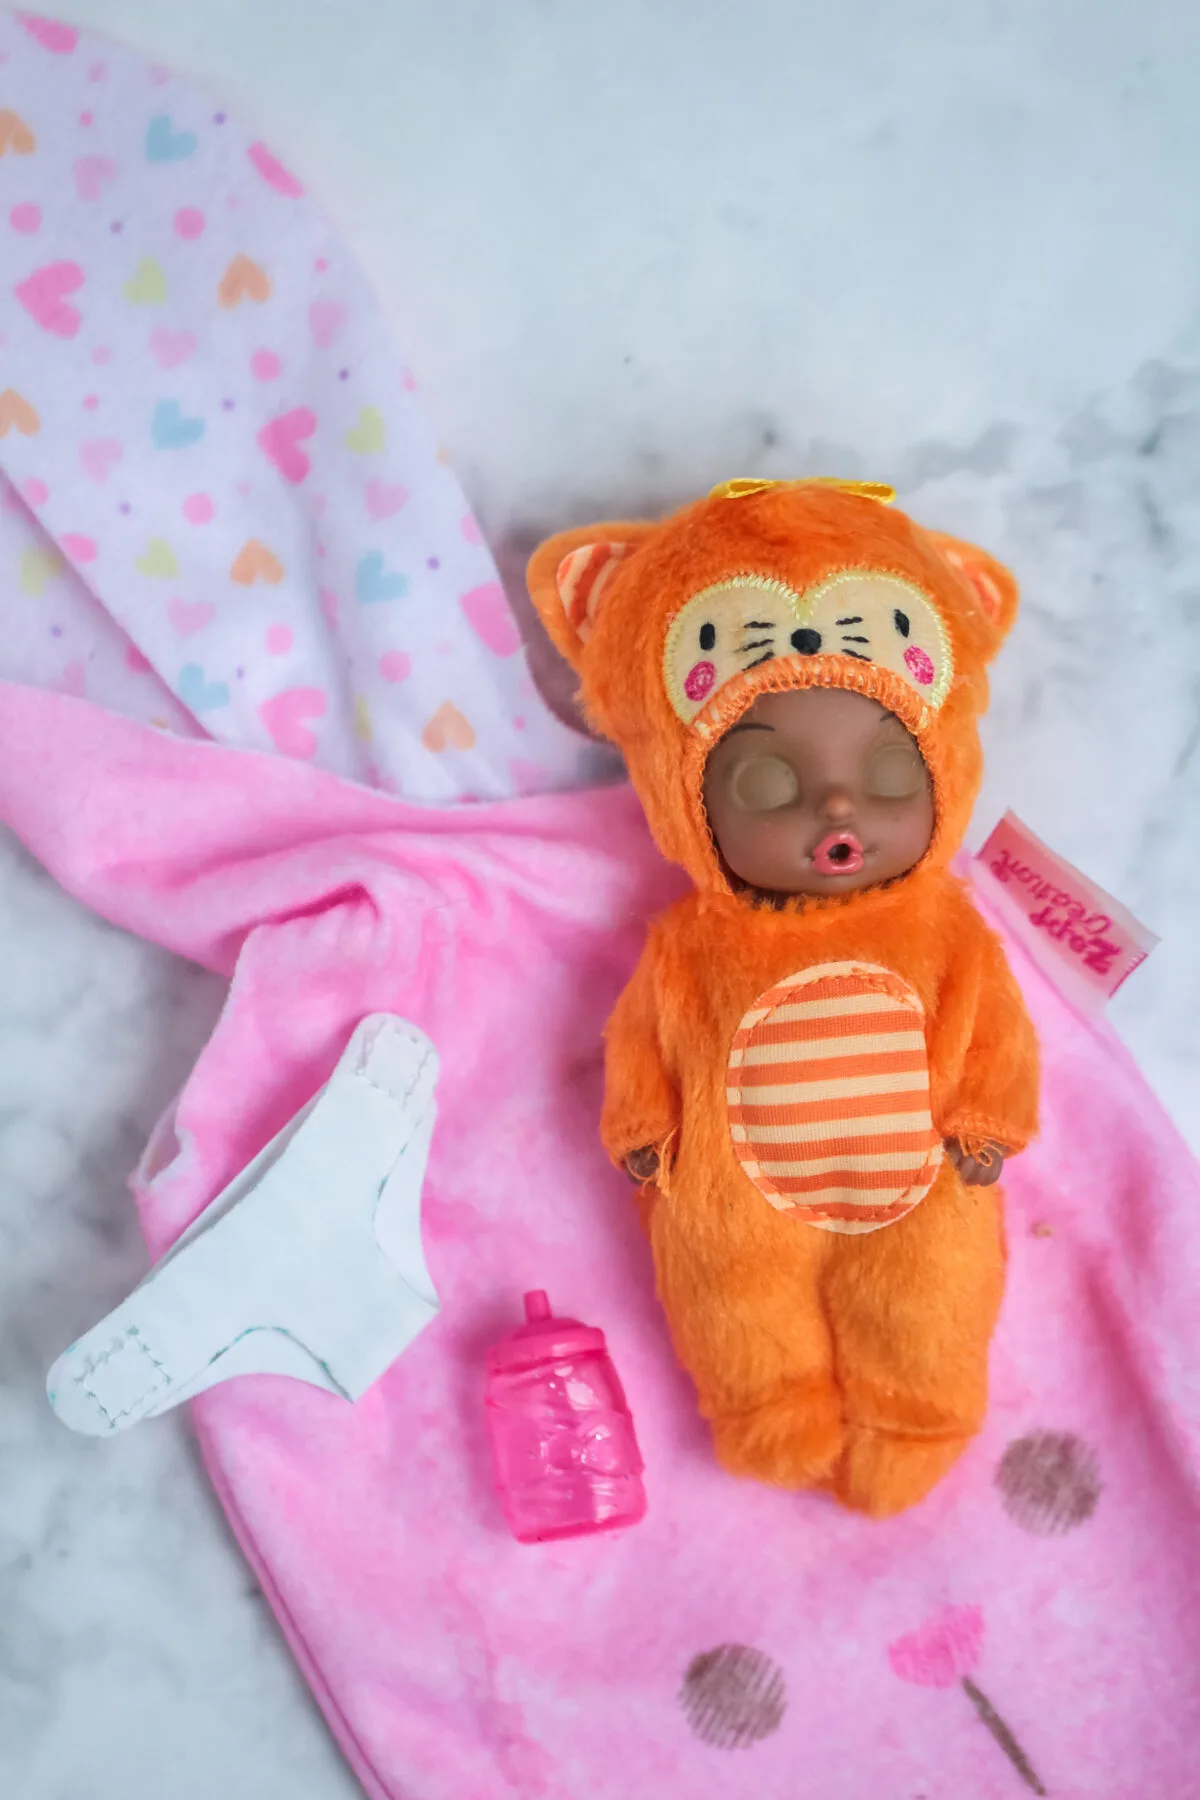 Baby Born Surprise Animal Babies are collectible baby dolls wearing soft and cozy themed onesies that come hidden inside a soft bunny pouch.